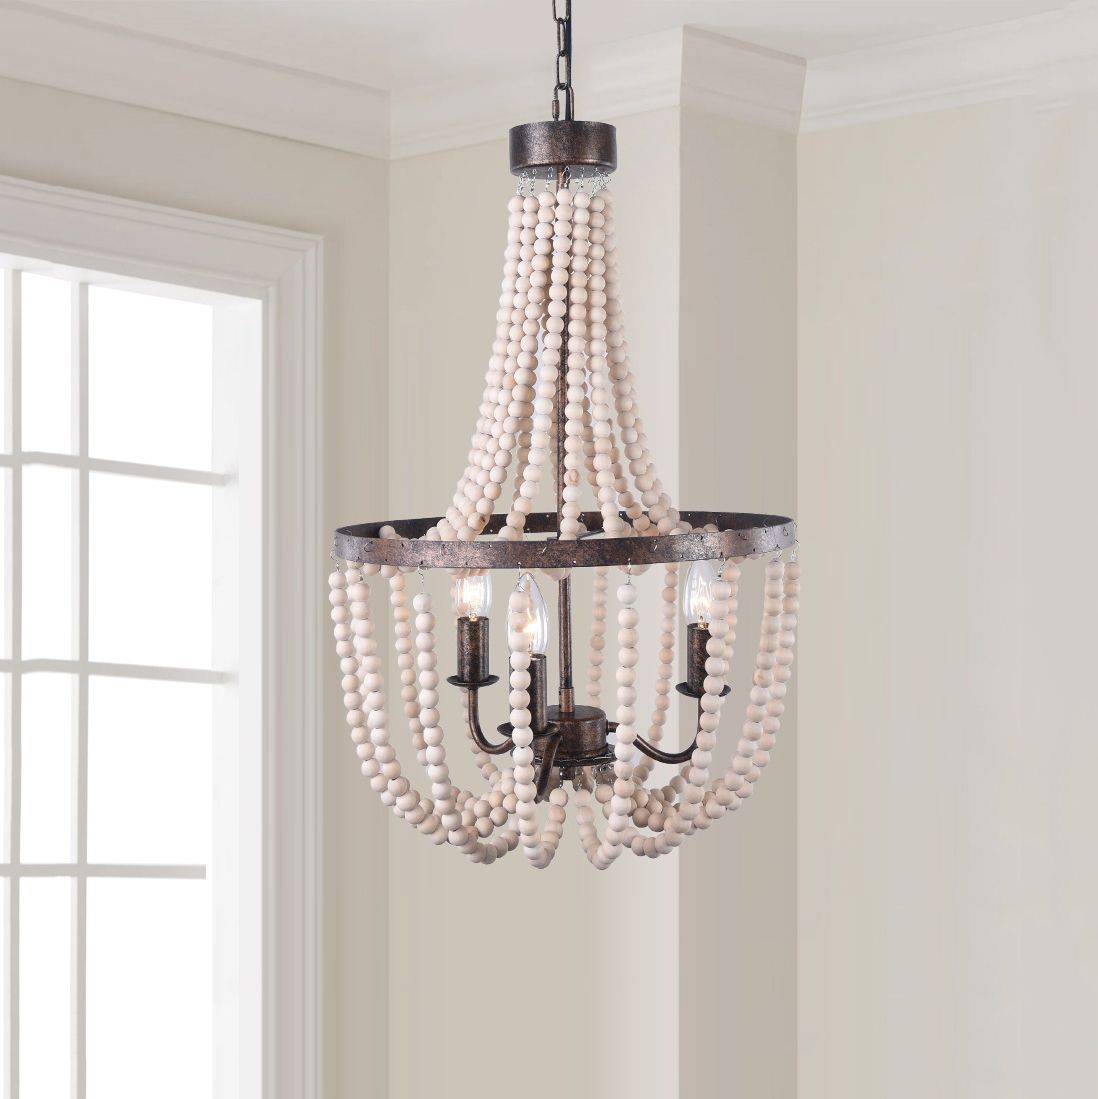 3 Light Wood Bead Empire Chandelier In Antique Bronze With Antique Gold Three Light Chandeliers (View 7 of 15)